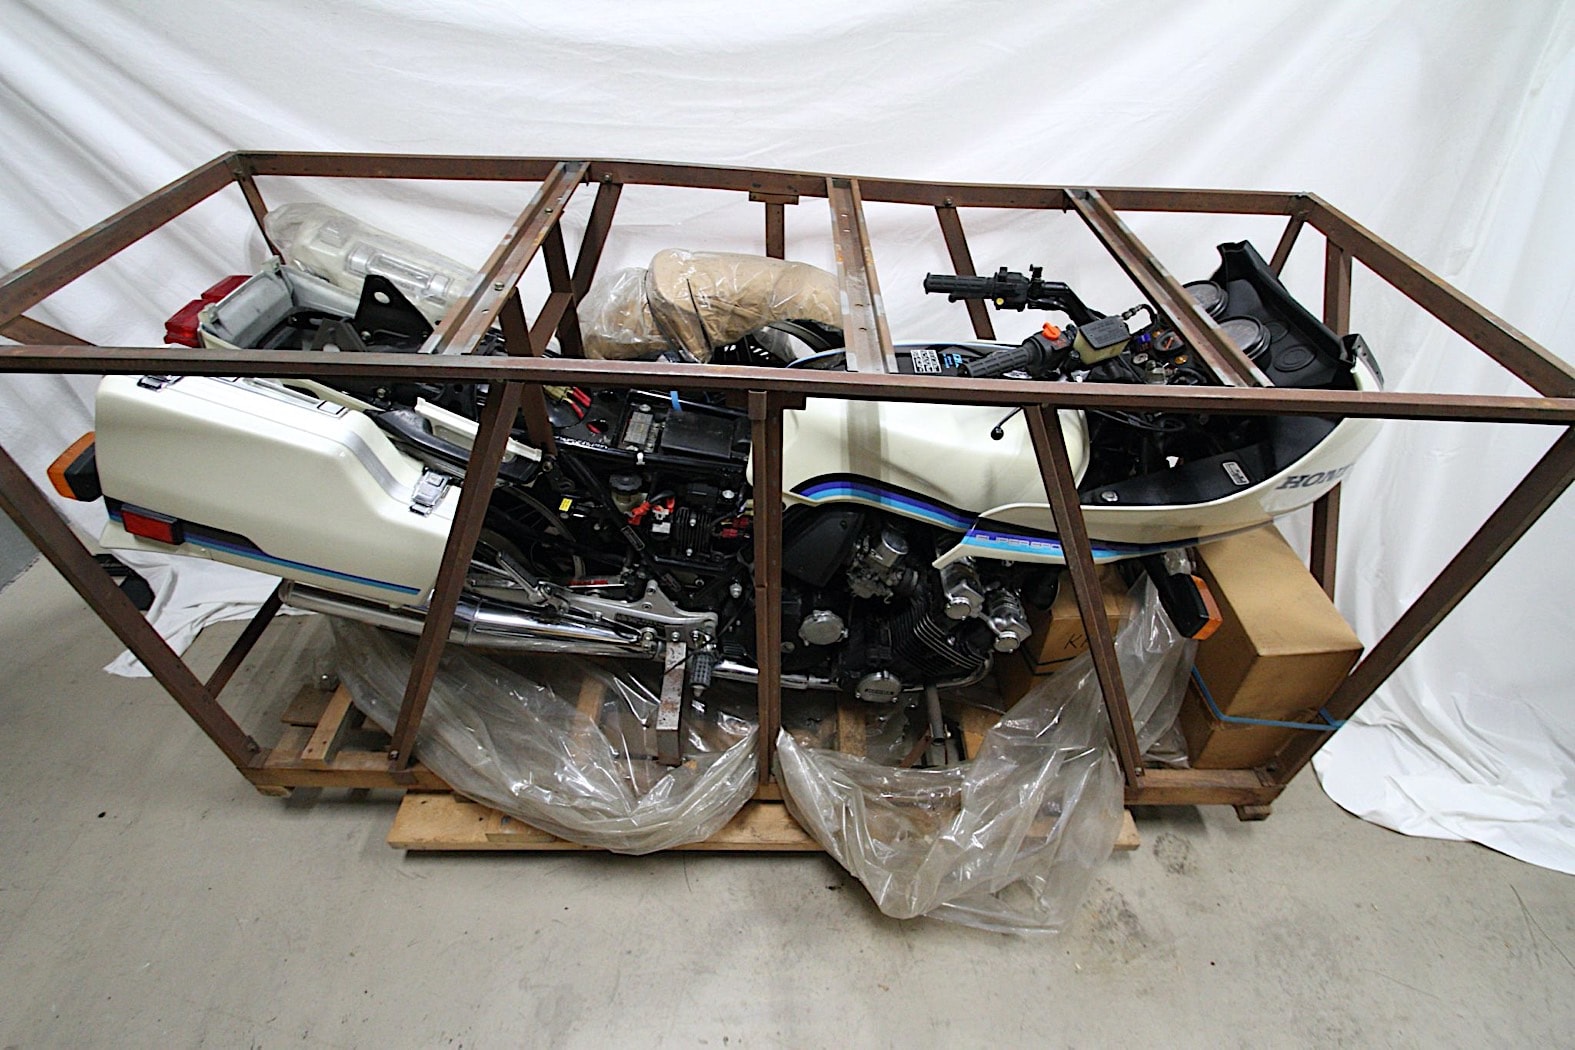 This Is How A 19 Honda Cbx Supersport Looks Like In A Crate Autoevolution